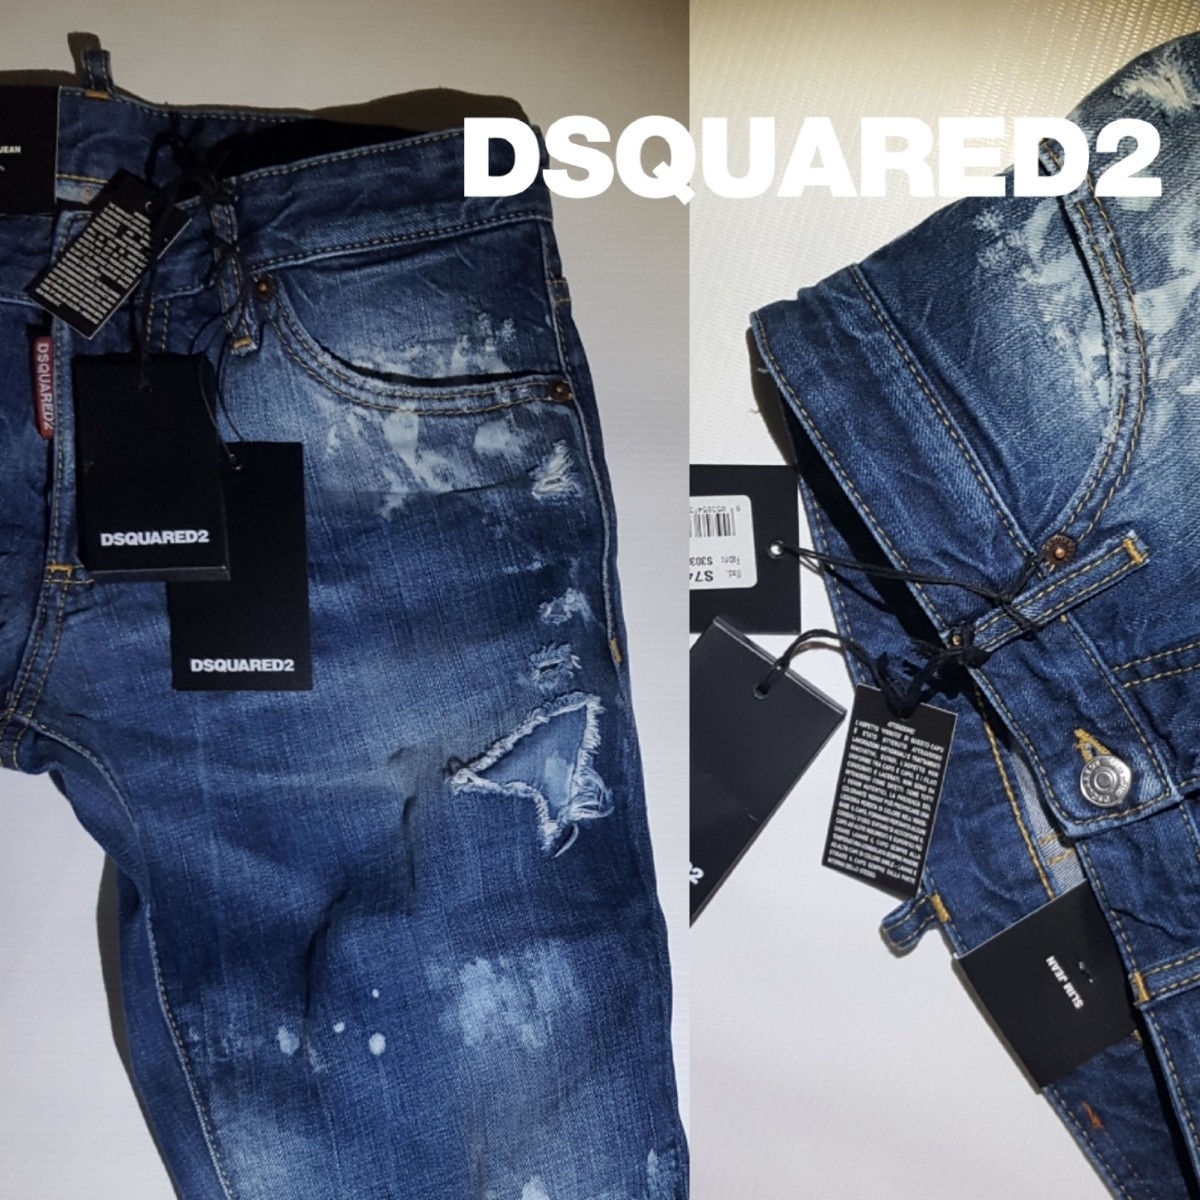 dsquared2 jeans 2017